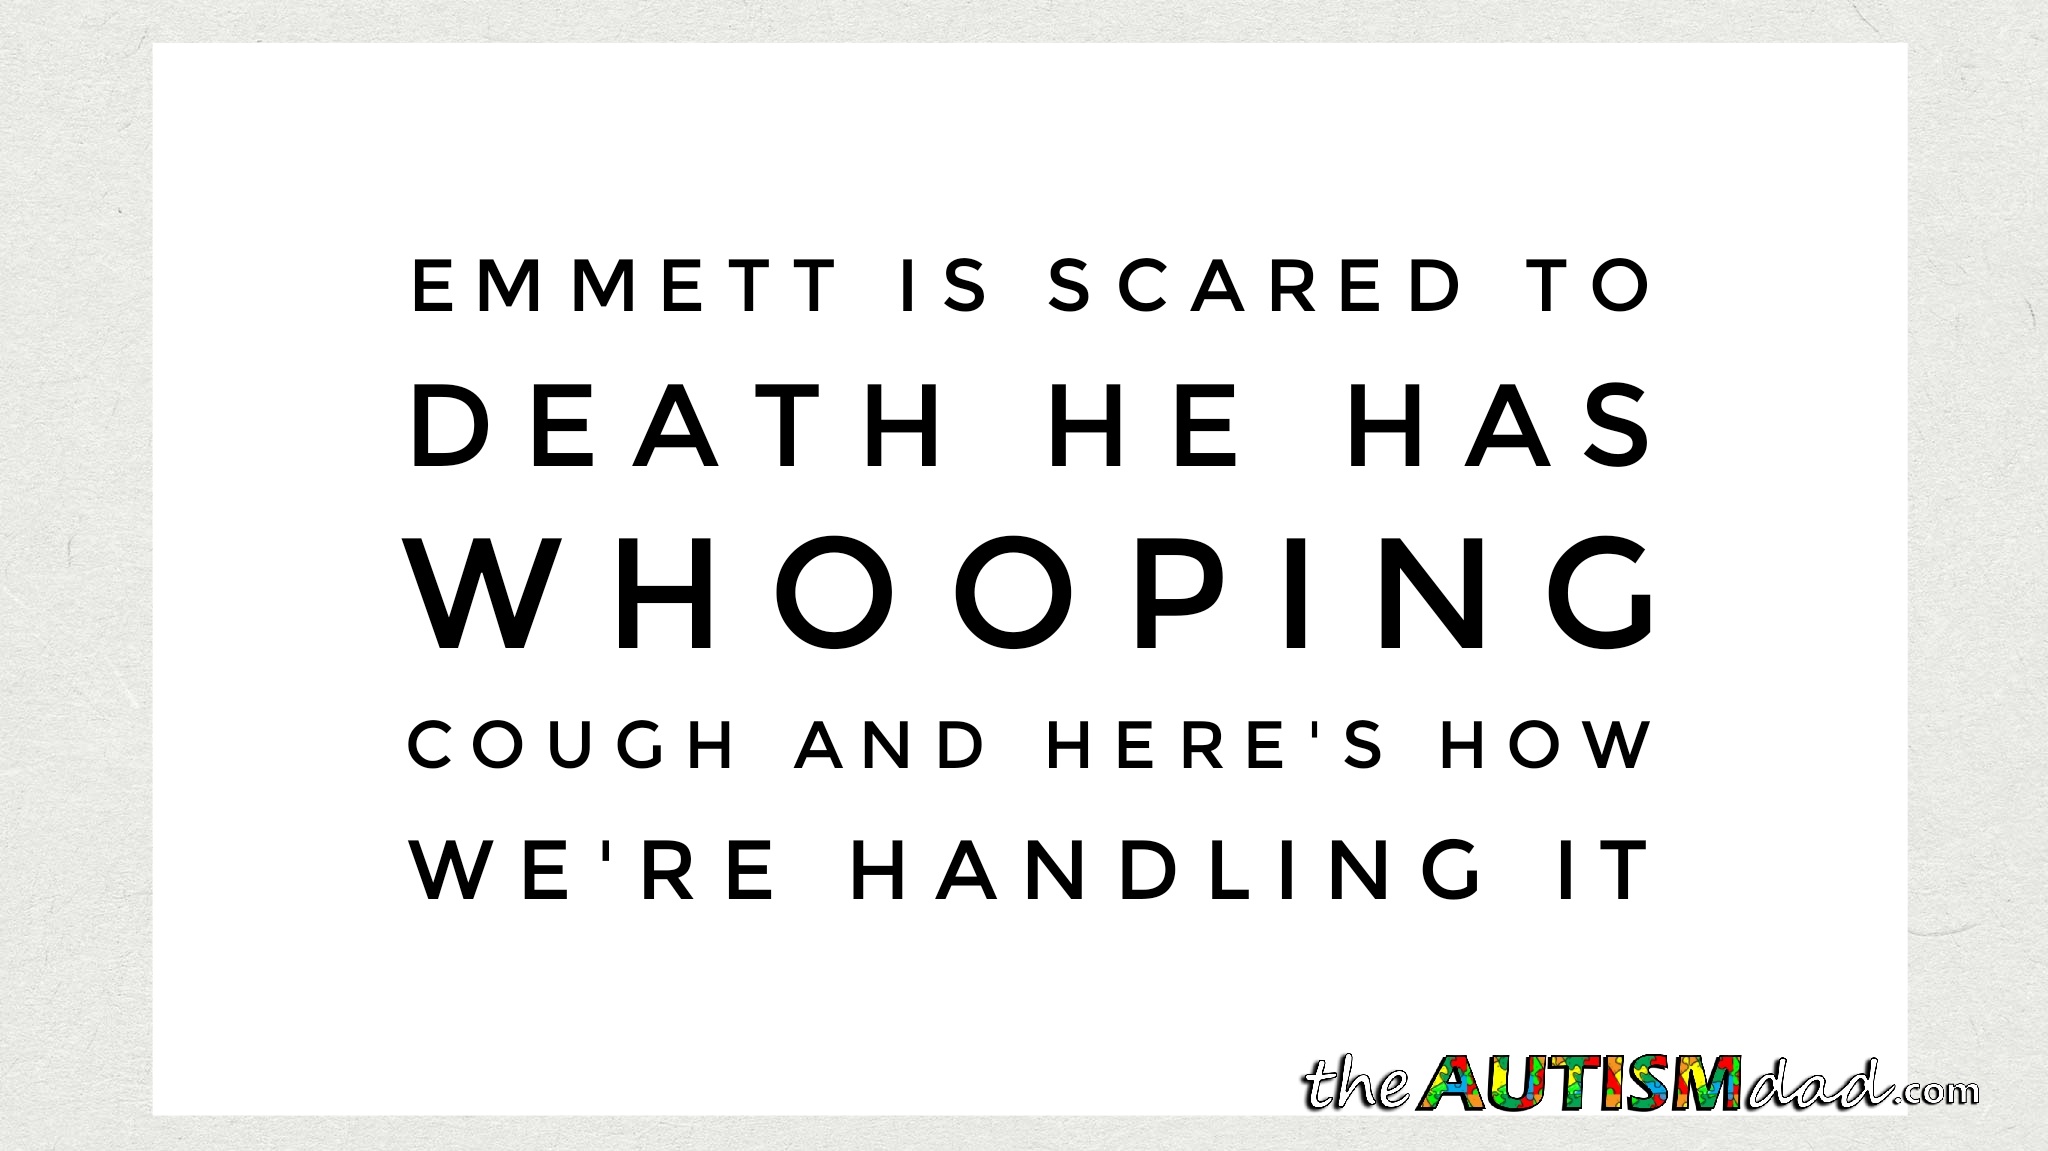 Read more about the article Emmett is scared to death he has #whoopingcough and here’s how we’re handling it